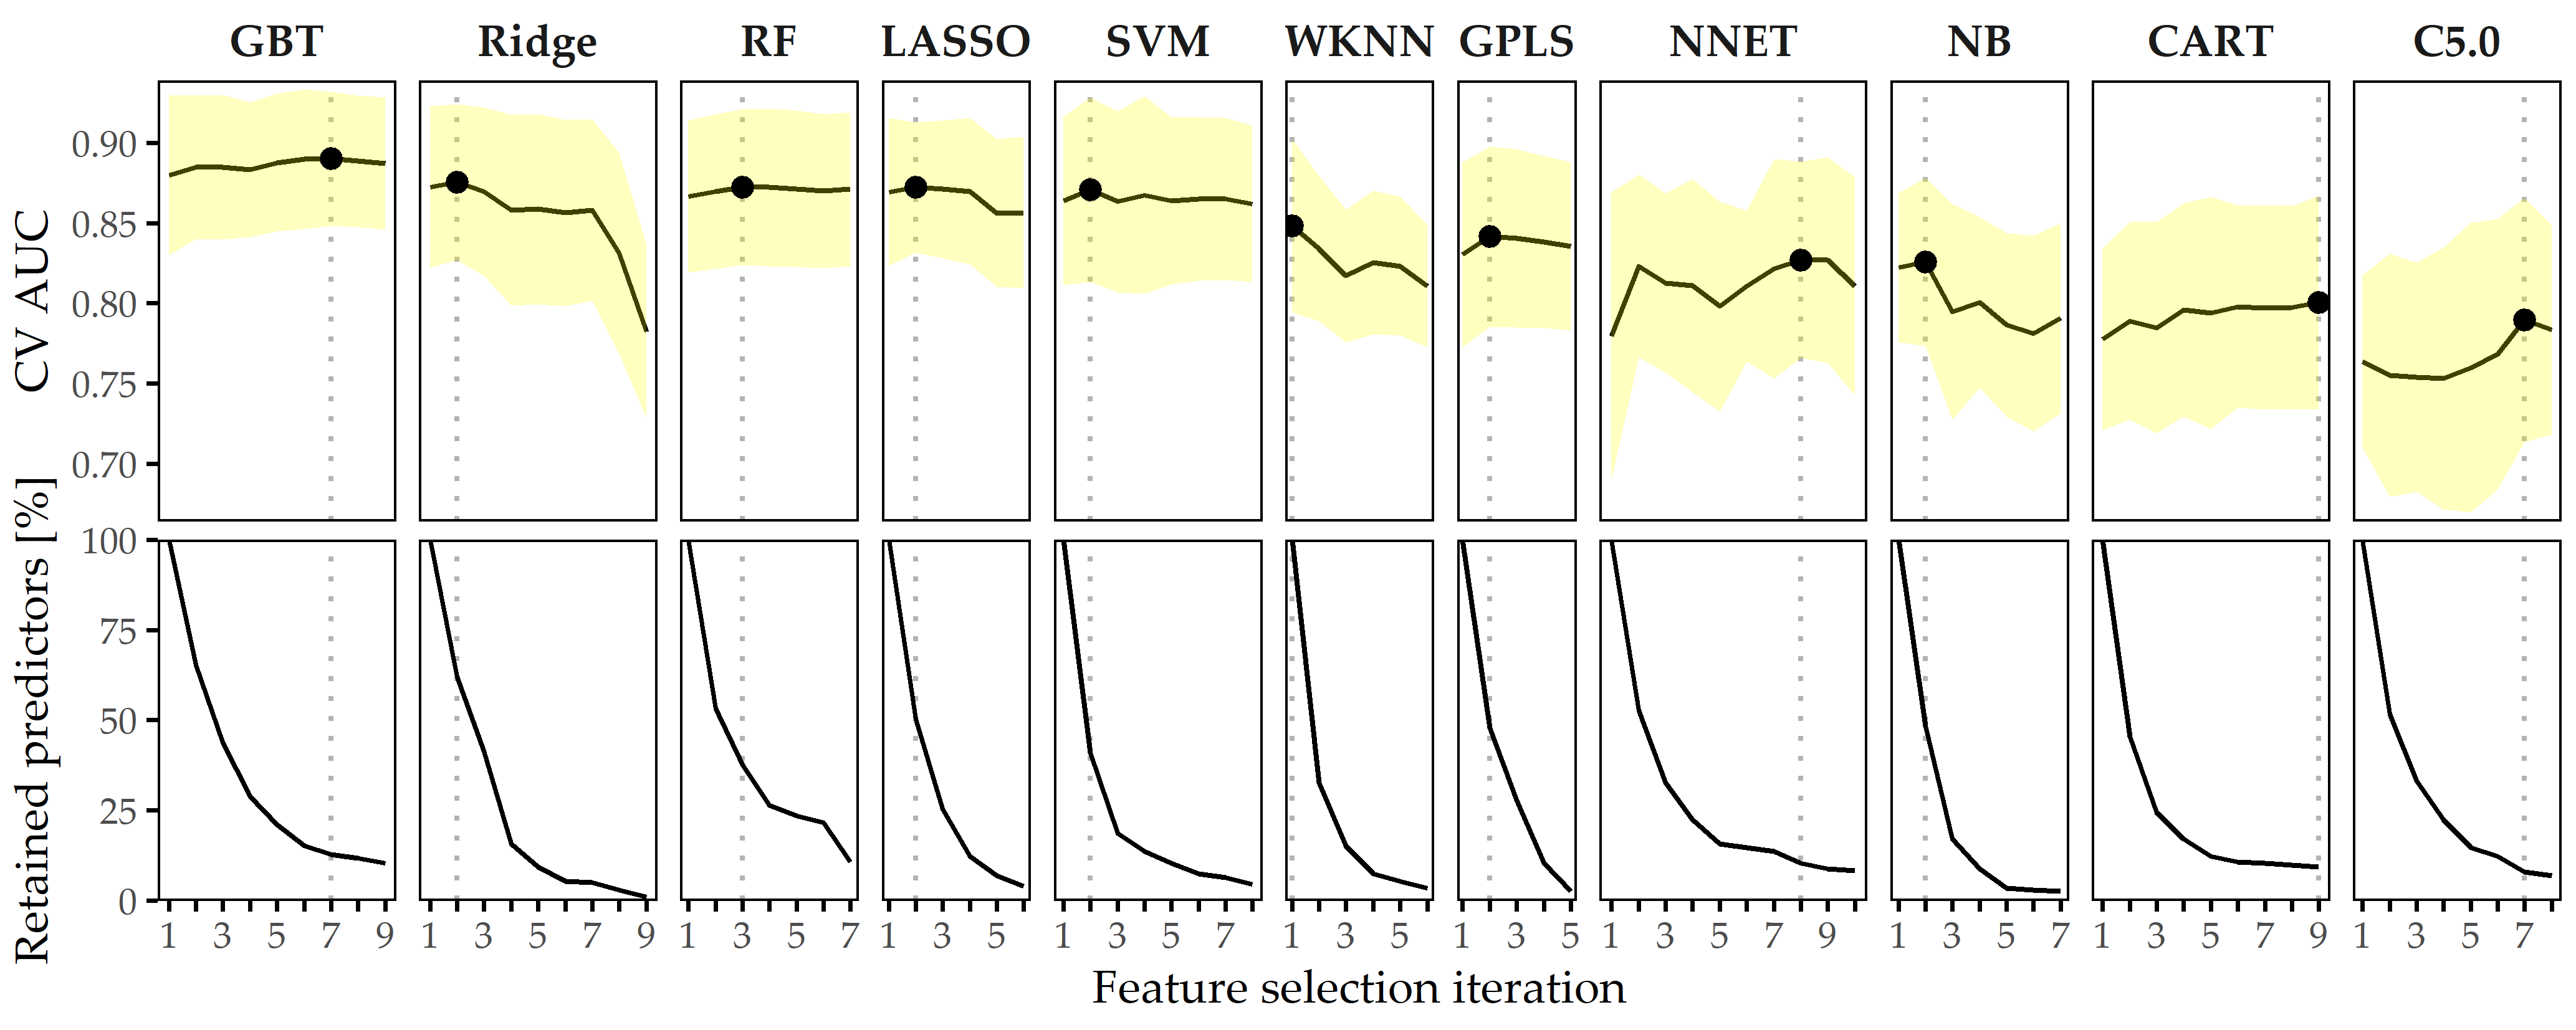 Classification results for CHA-Tinnitus. Average cross-validation AUC and relative number of retained predictors for each classifier with optimal hyperparameter configuration and each feature selection iteration. Yellow ribbons depict standard deviation. Points highlight each classifier’s run with maximum AUC. Classifiers are ordered by their maximum AUC from left to right.